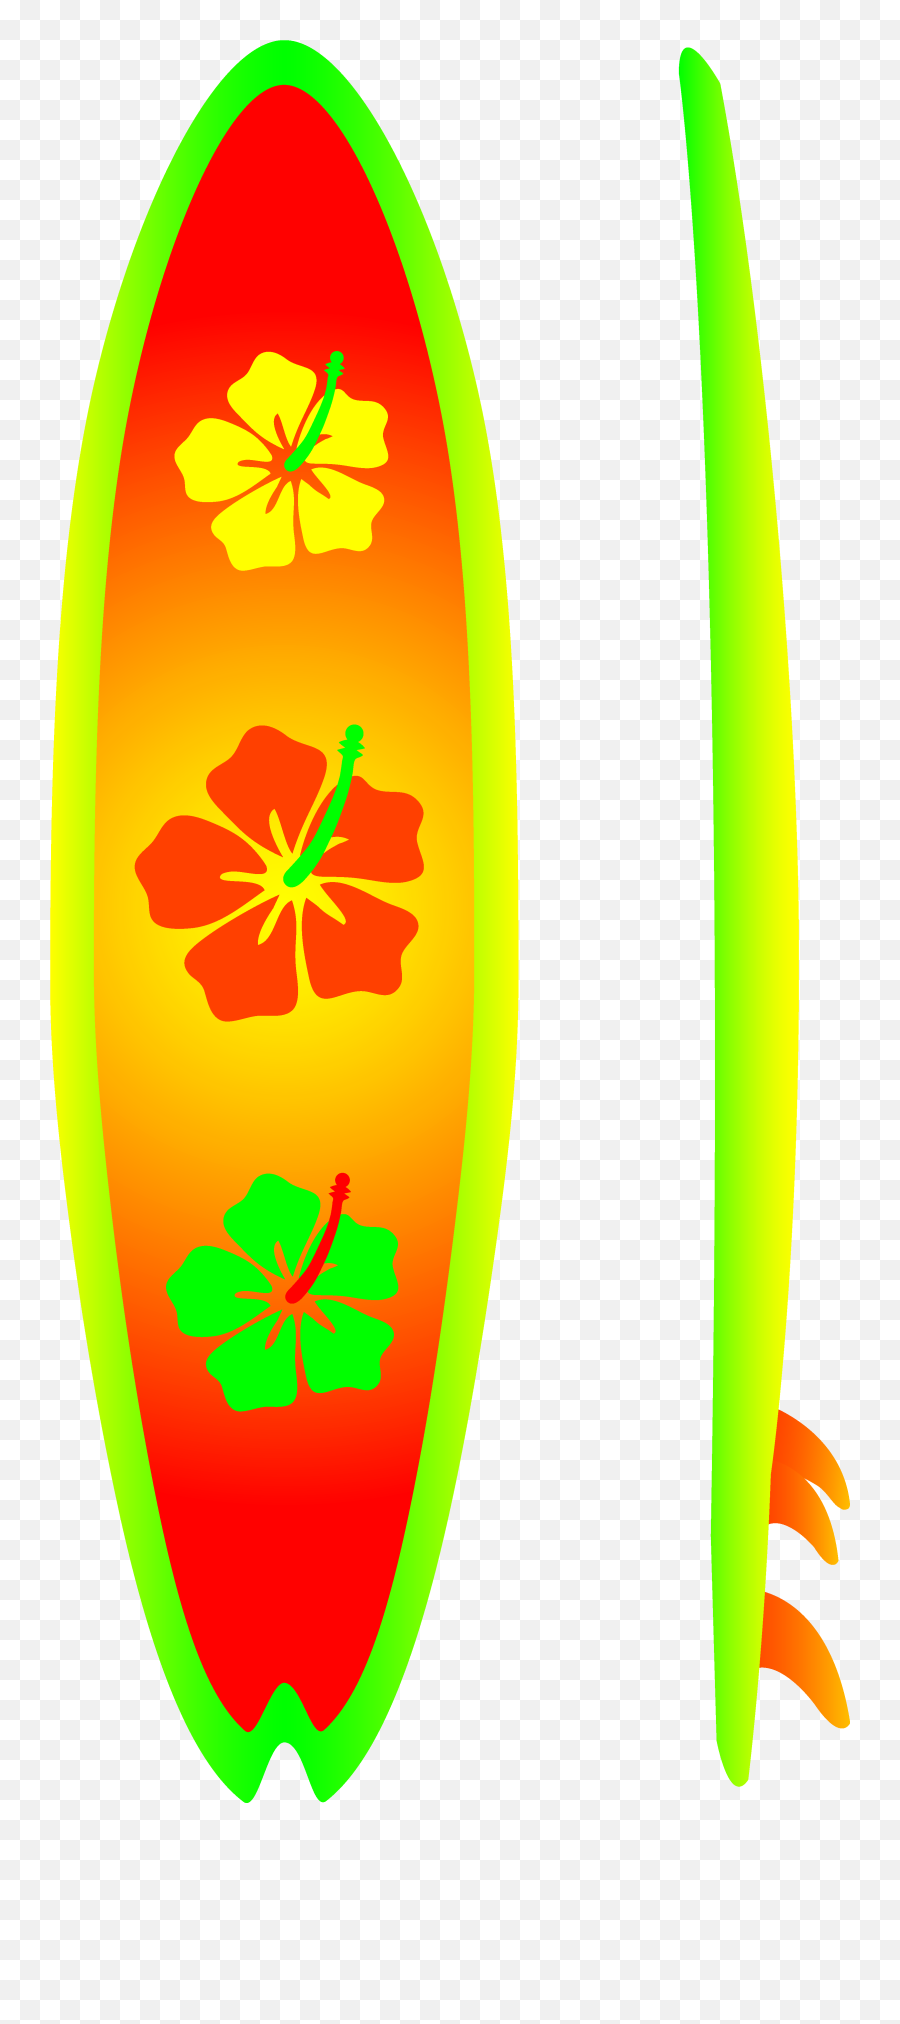 Free Picture Of A Surf Board Download - Language Emoji,Surfboard Clipart